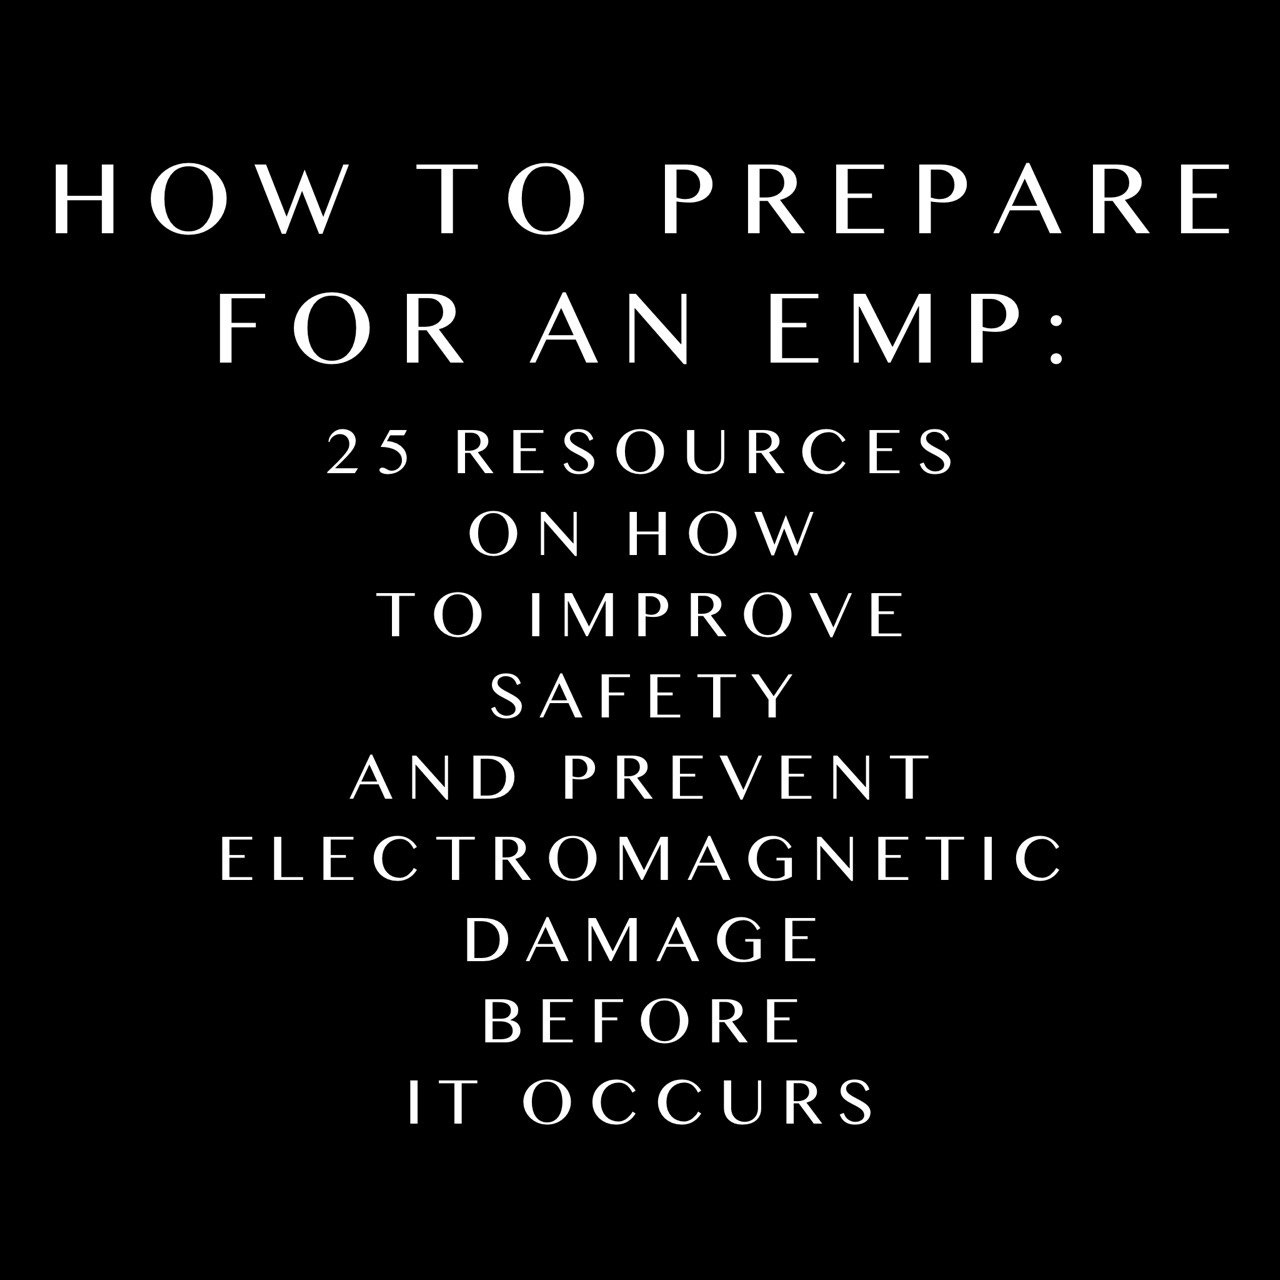 How To Prepare For An EMP: 25 Resources On How To Improve Safety and Prevent Electromagnetic Damage Before It Occurs